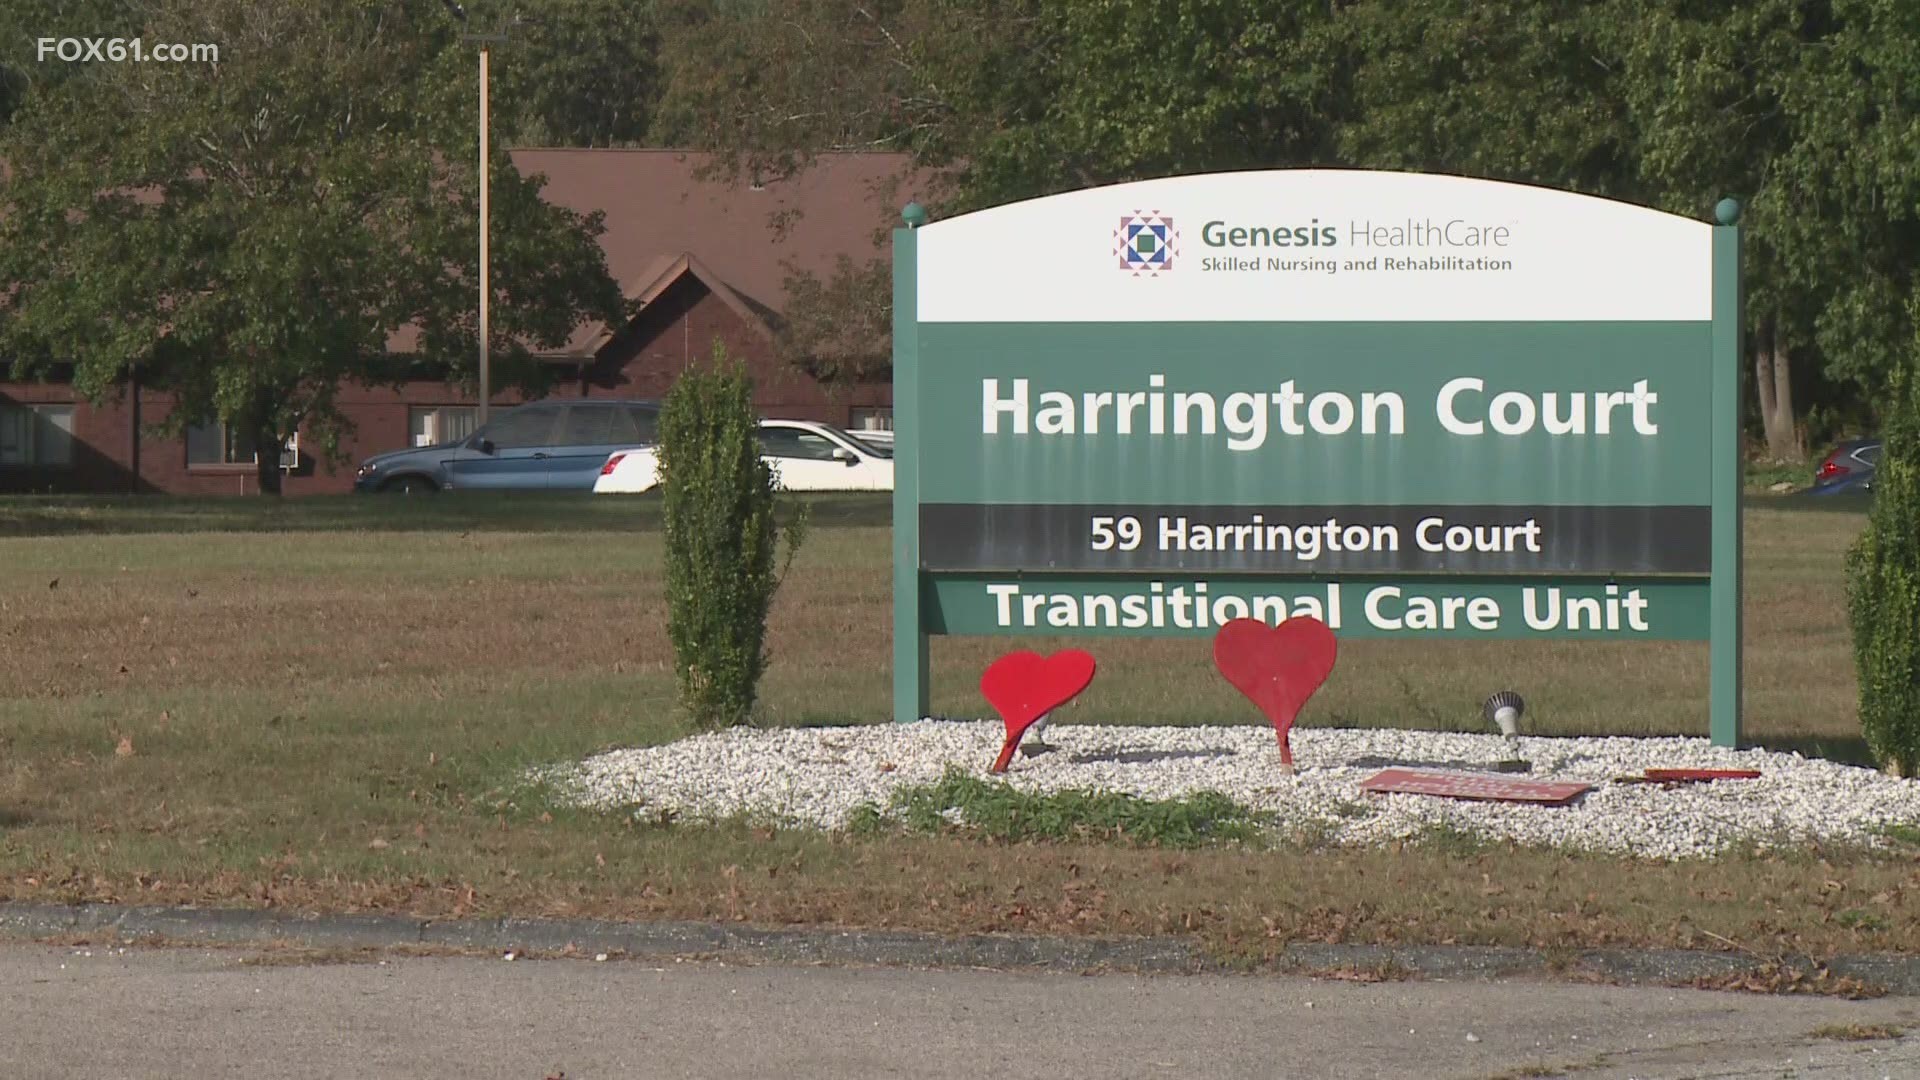 There have been 46 residents and 11 staff members of the Harrington Court Nursing home who have tested positive for the virus since last week.